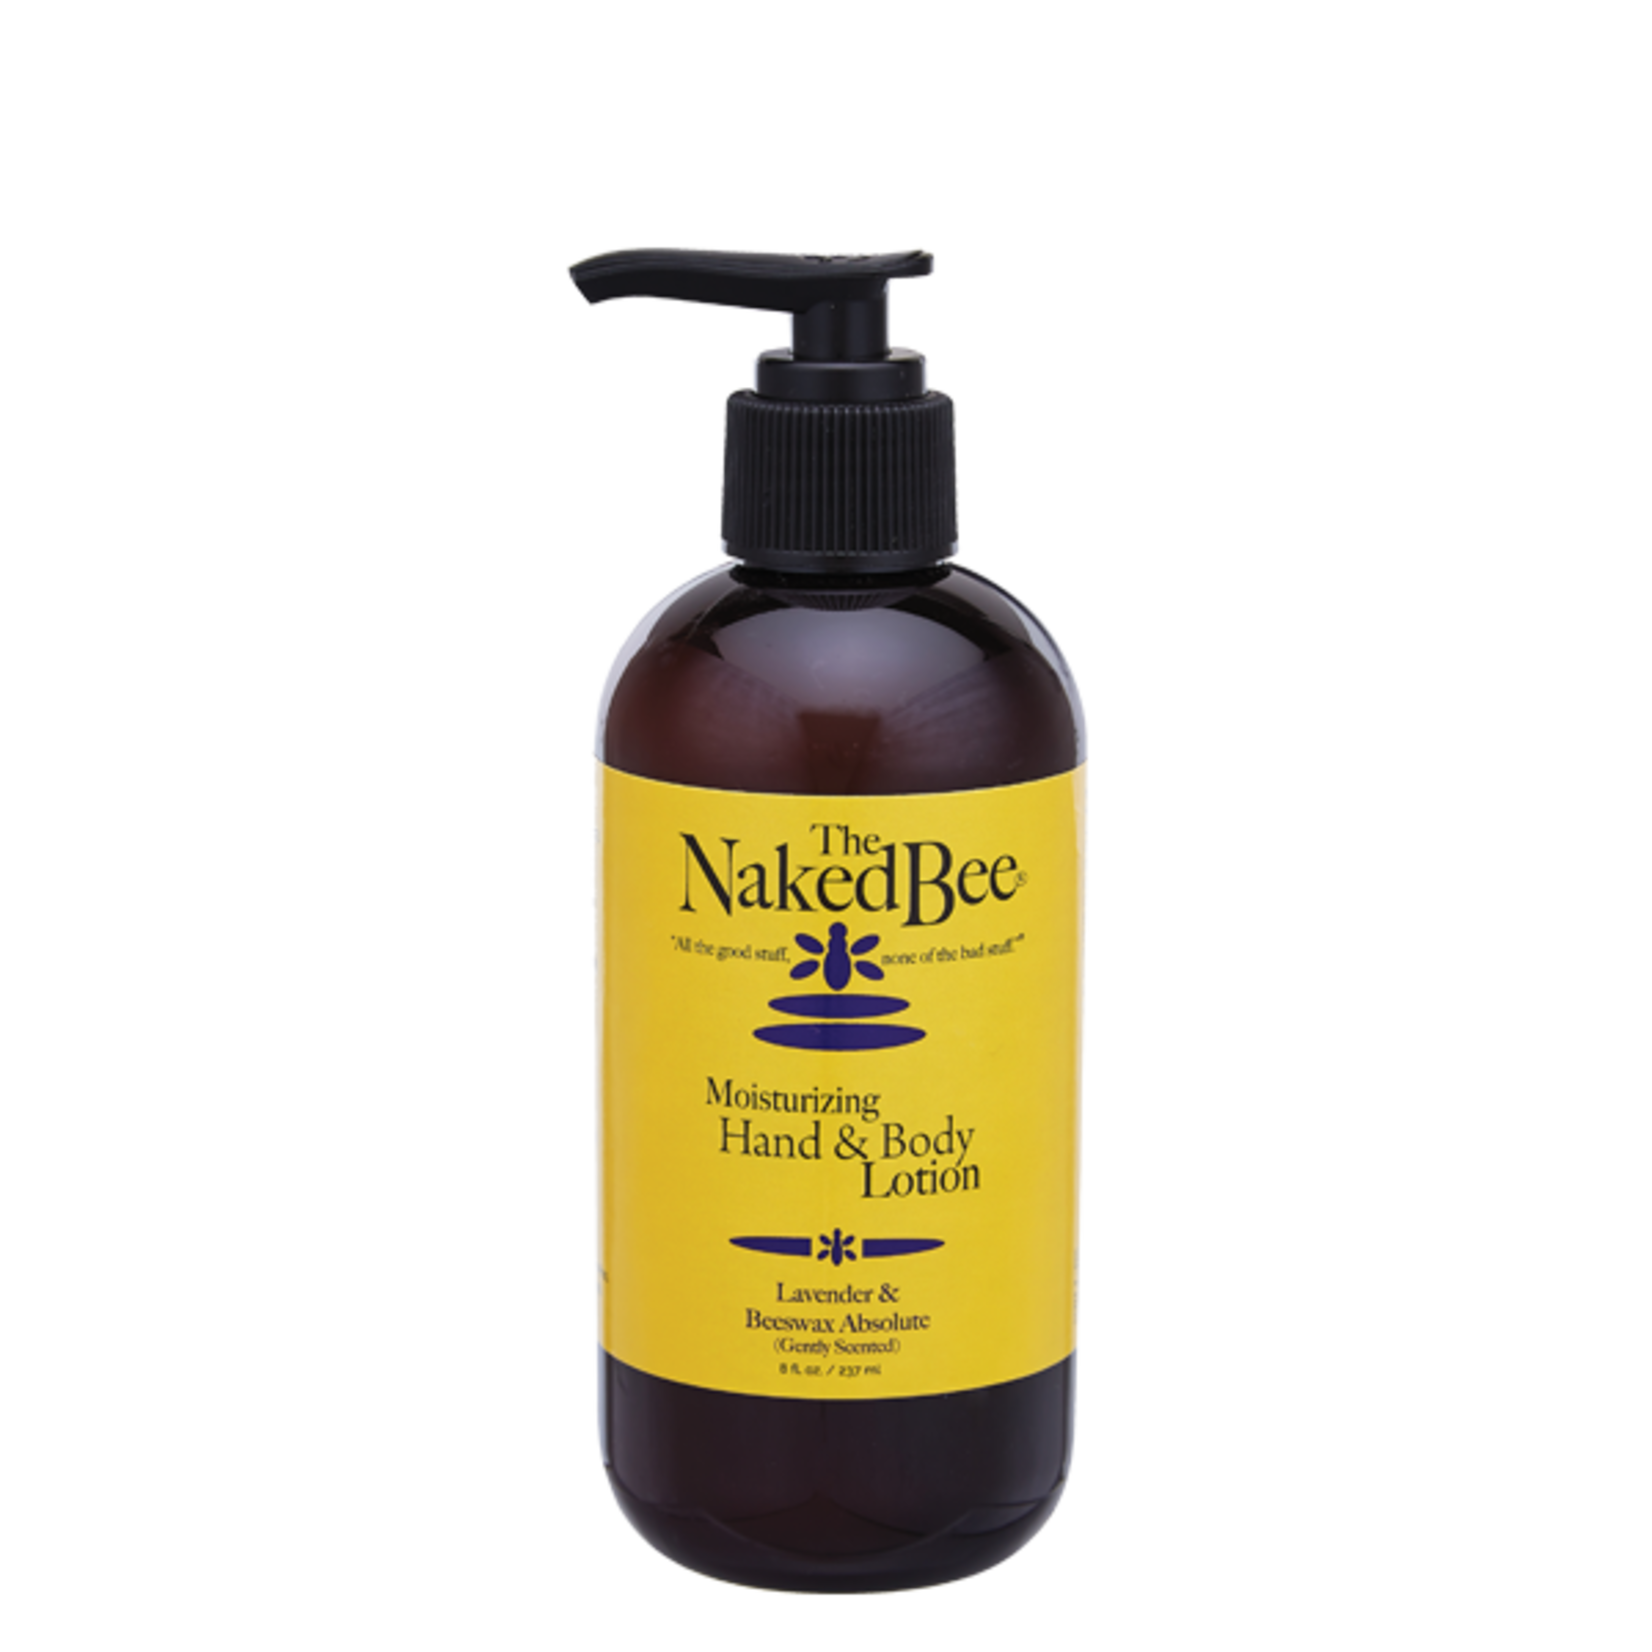 The Naked Bee The Naked Bee Moisturizing Hand & Body Lotion 8 oz pump